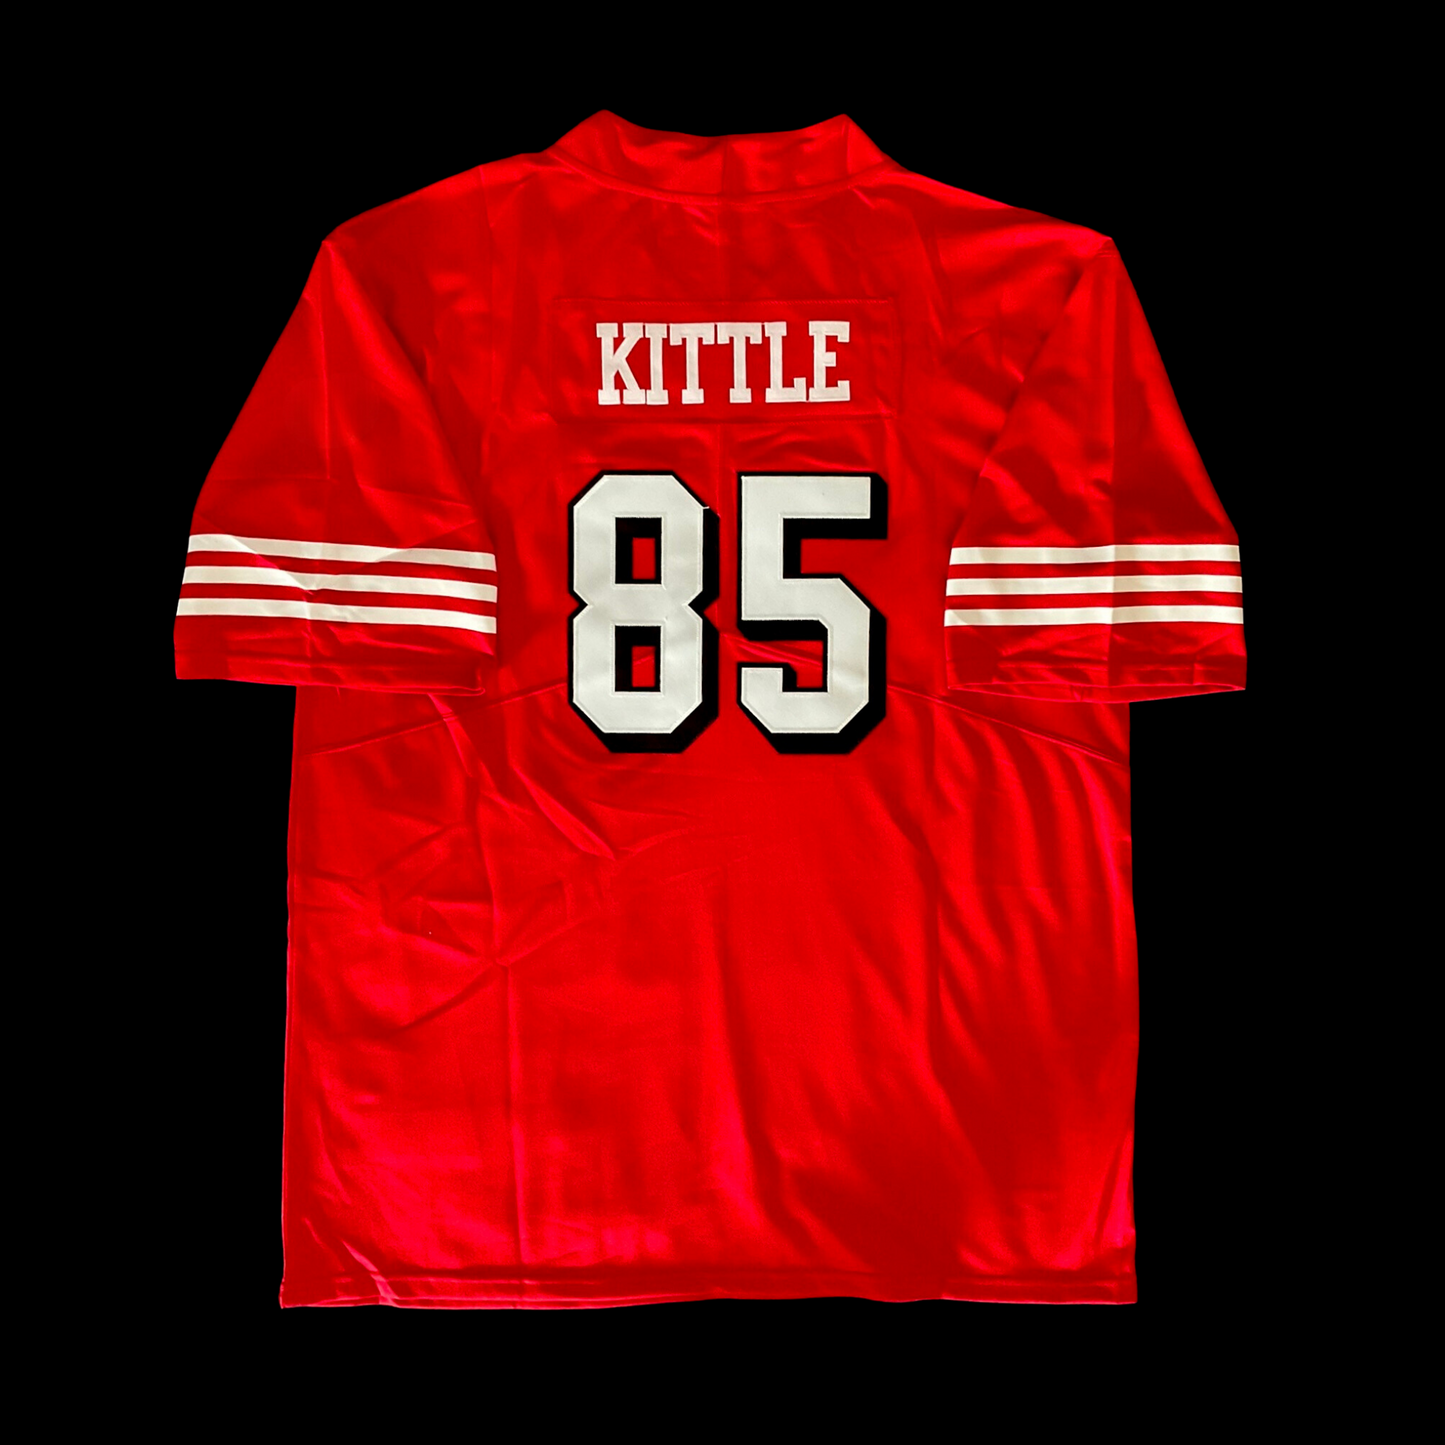 #85 Kittle Stitched Men’s 49ers jersey